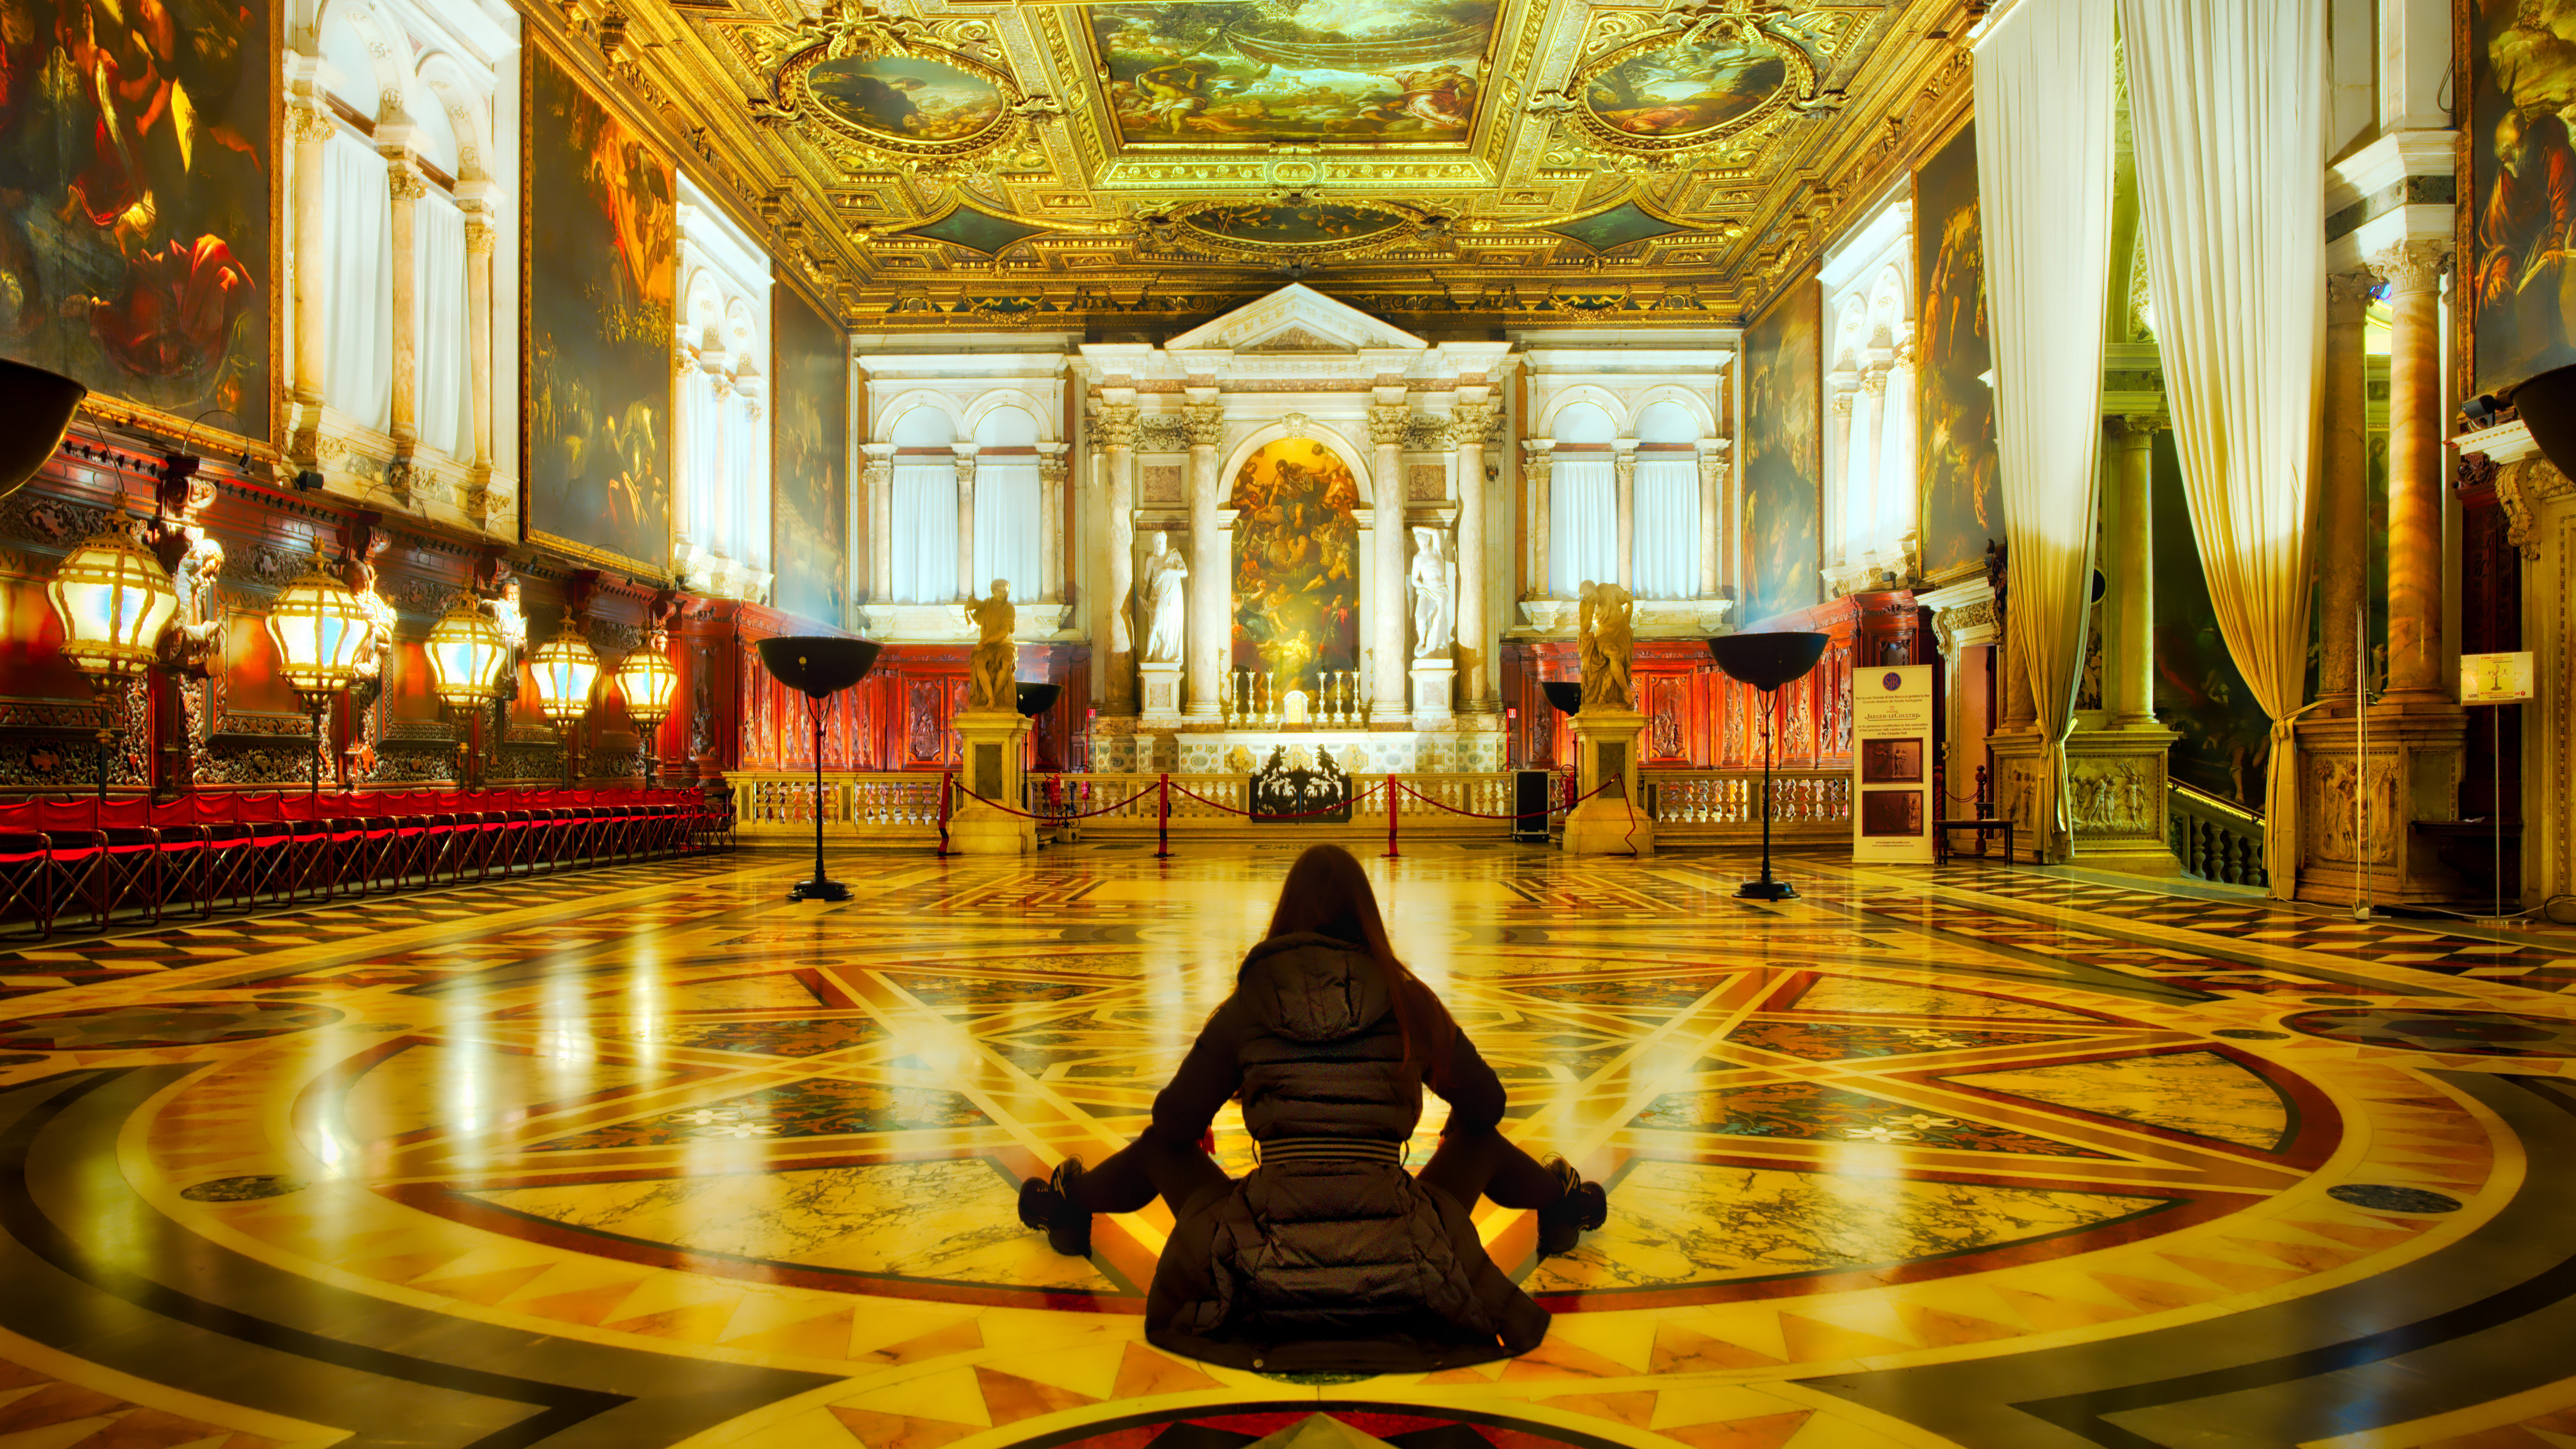 General 7680x4320 Italy Venice church Europe indoors women sitting on the floor